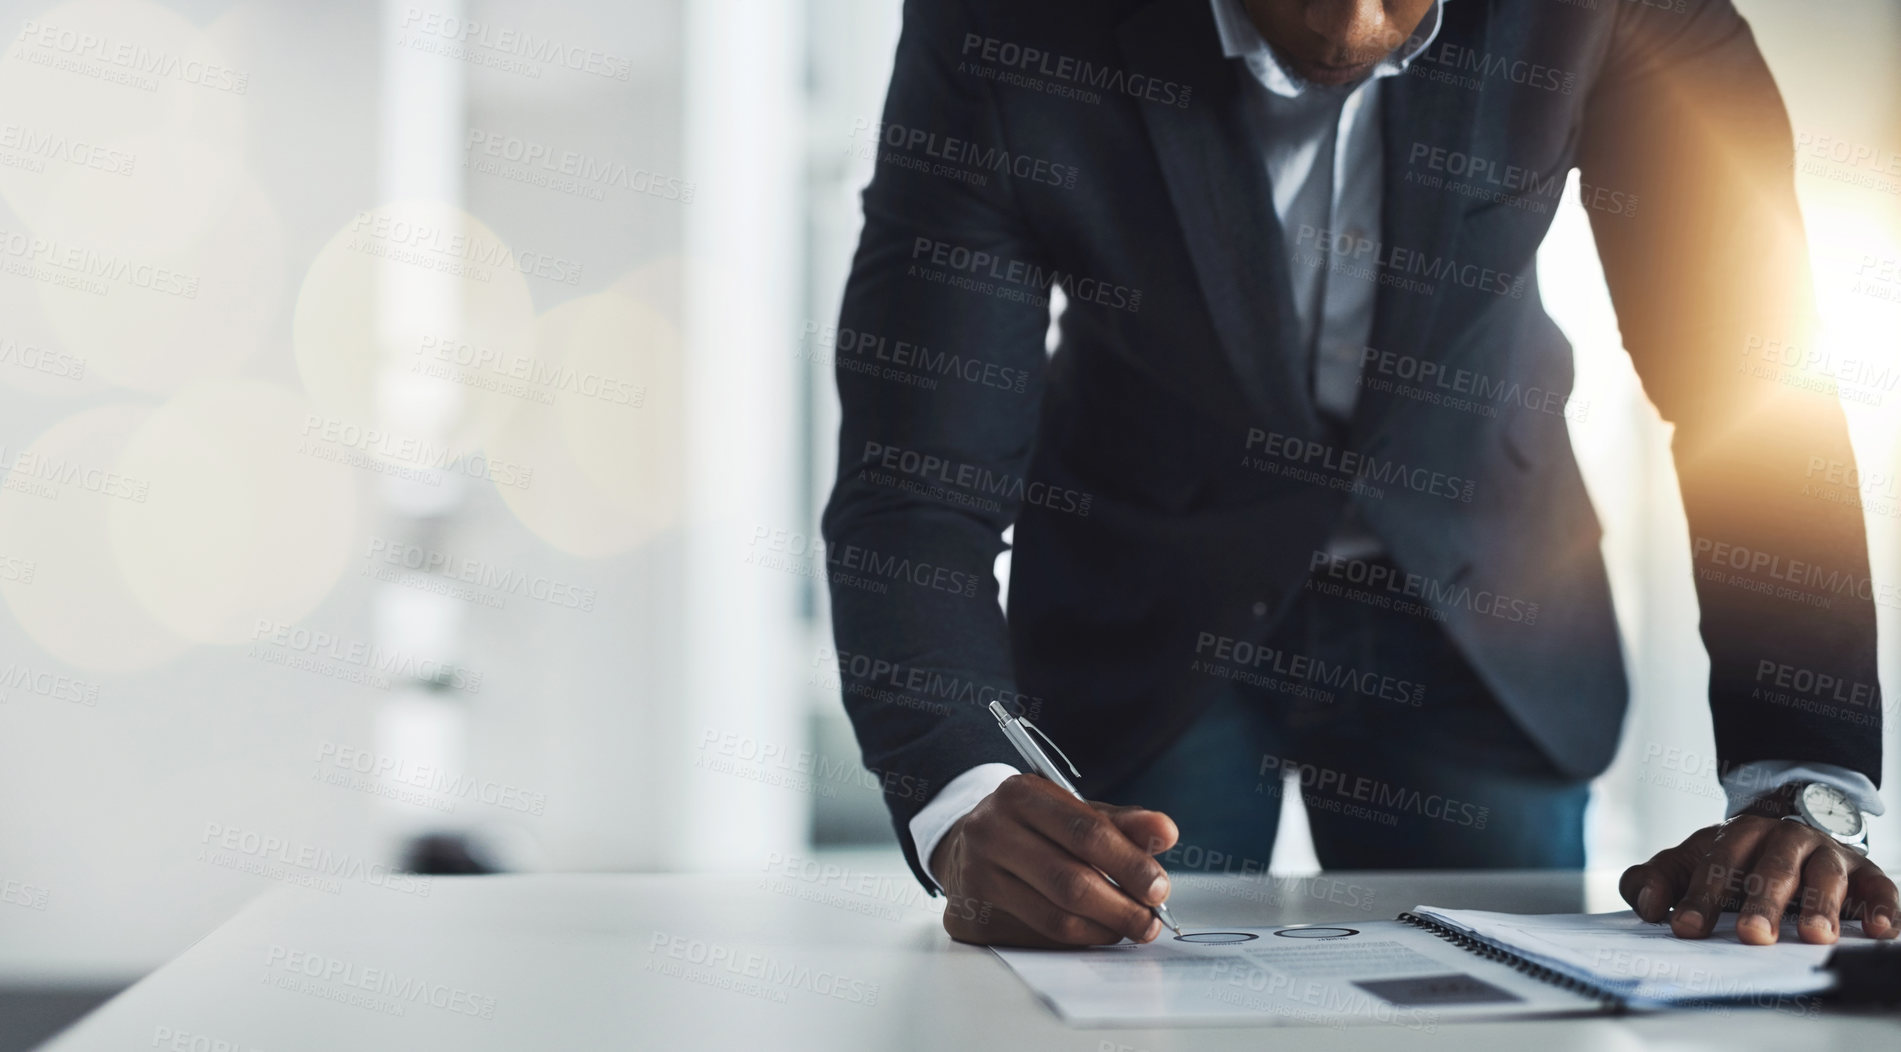 Buy stock photo Cropped shot of an unrecognizable young businessman taking notes while working in his modern office